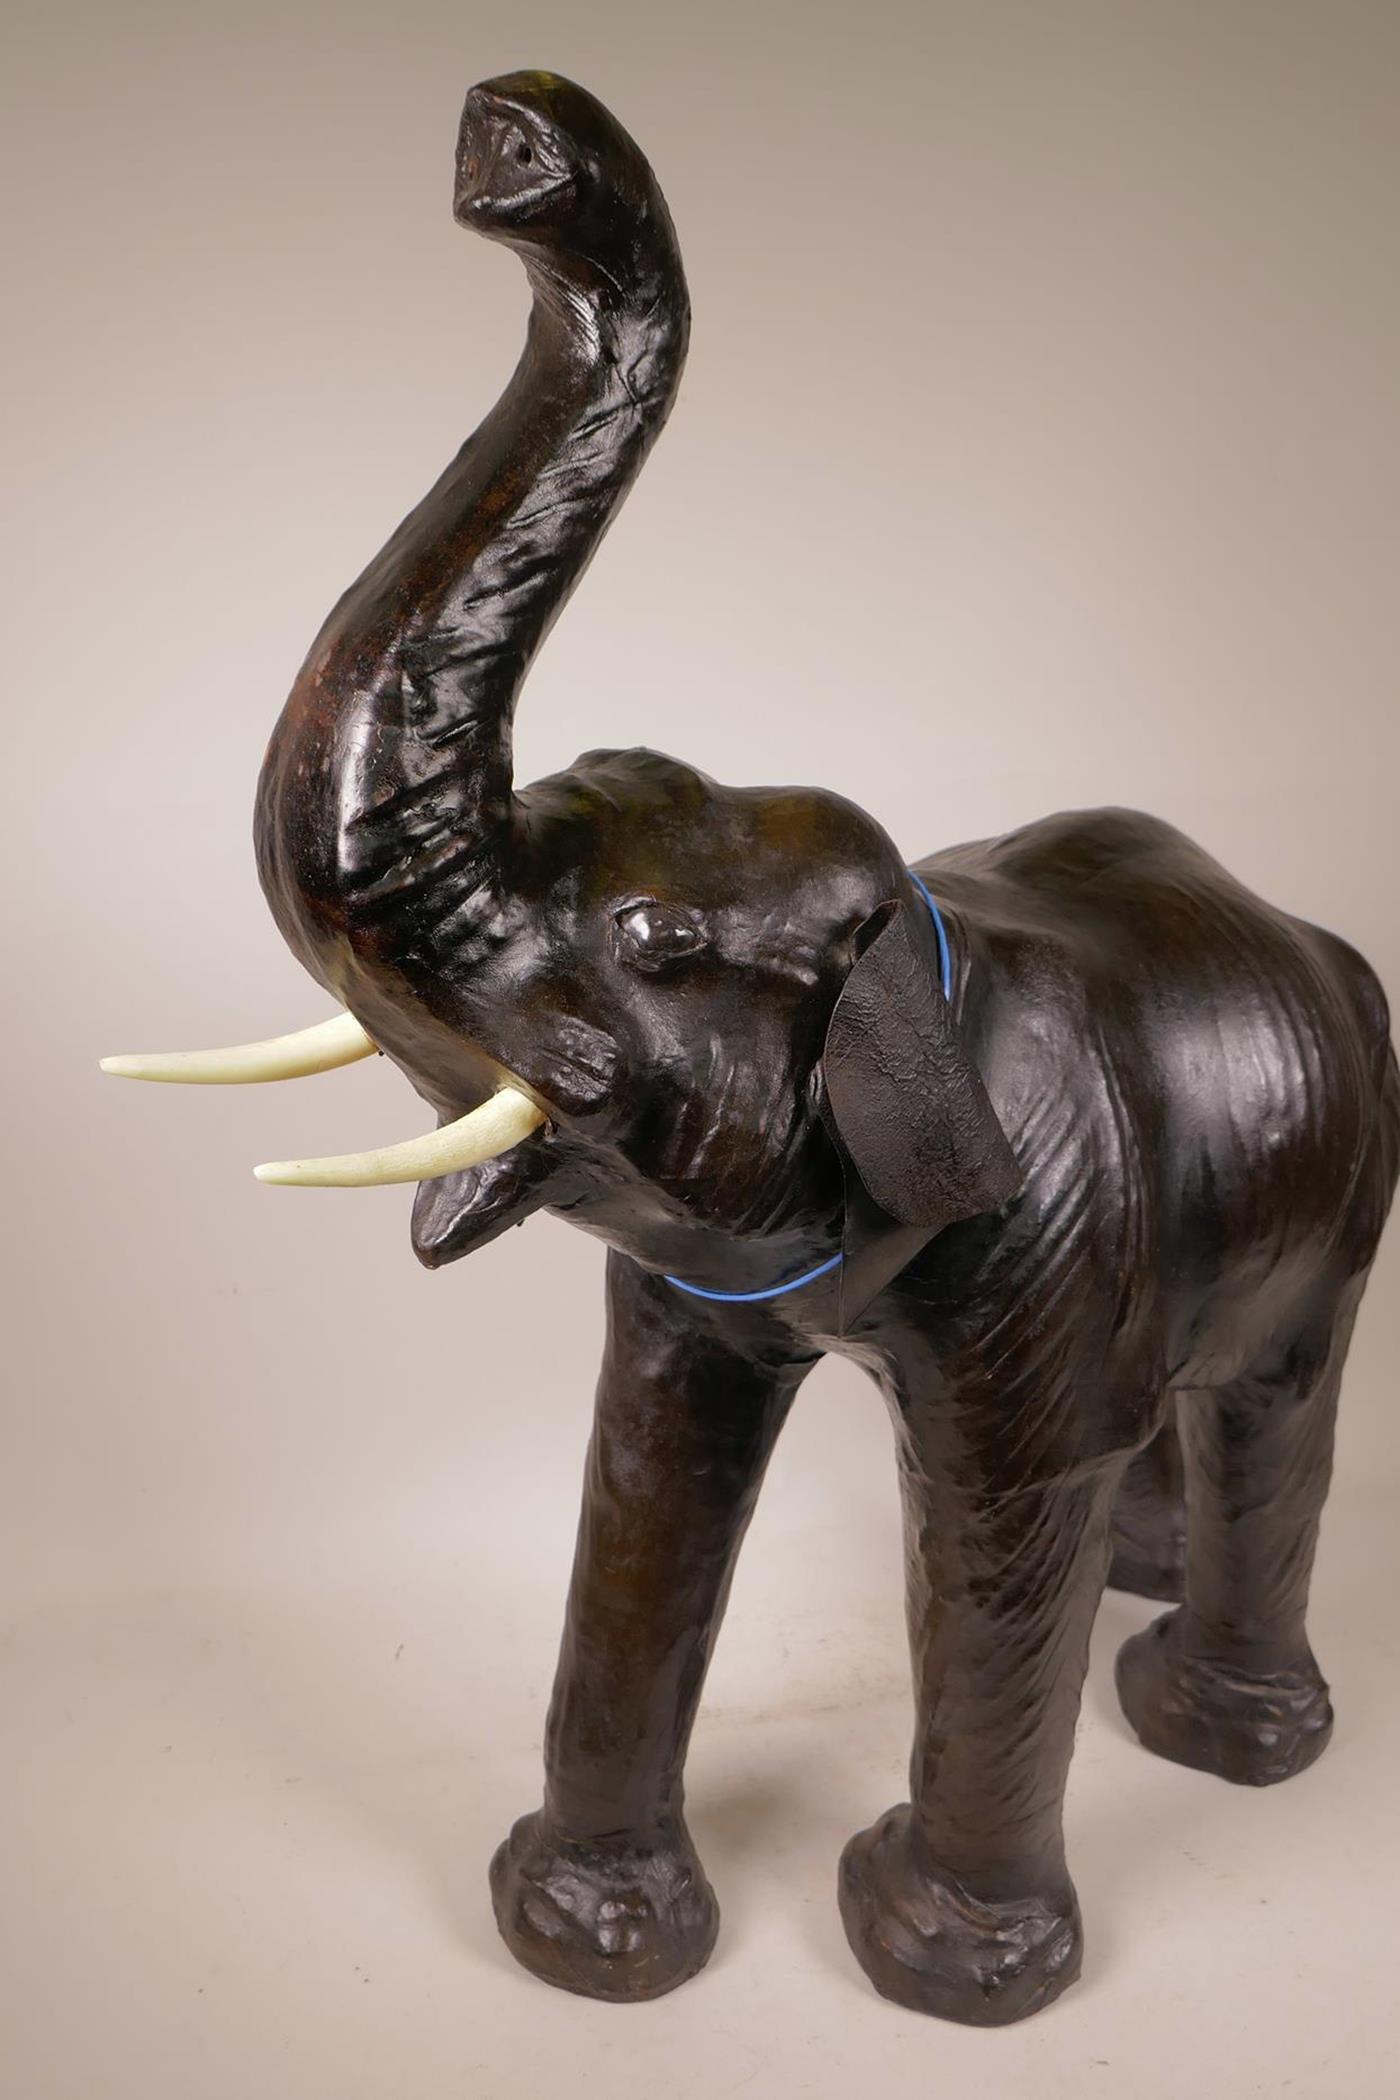 An Omersa Liberty style leather elephant figure, 29" high - Image 2 of 3